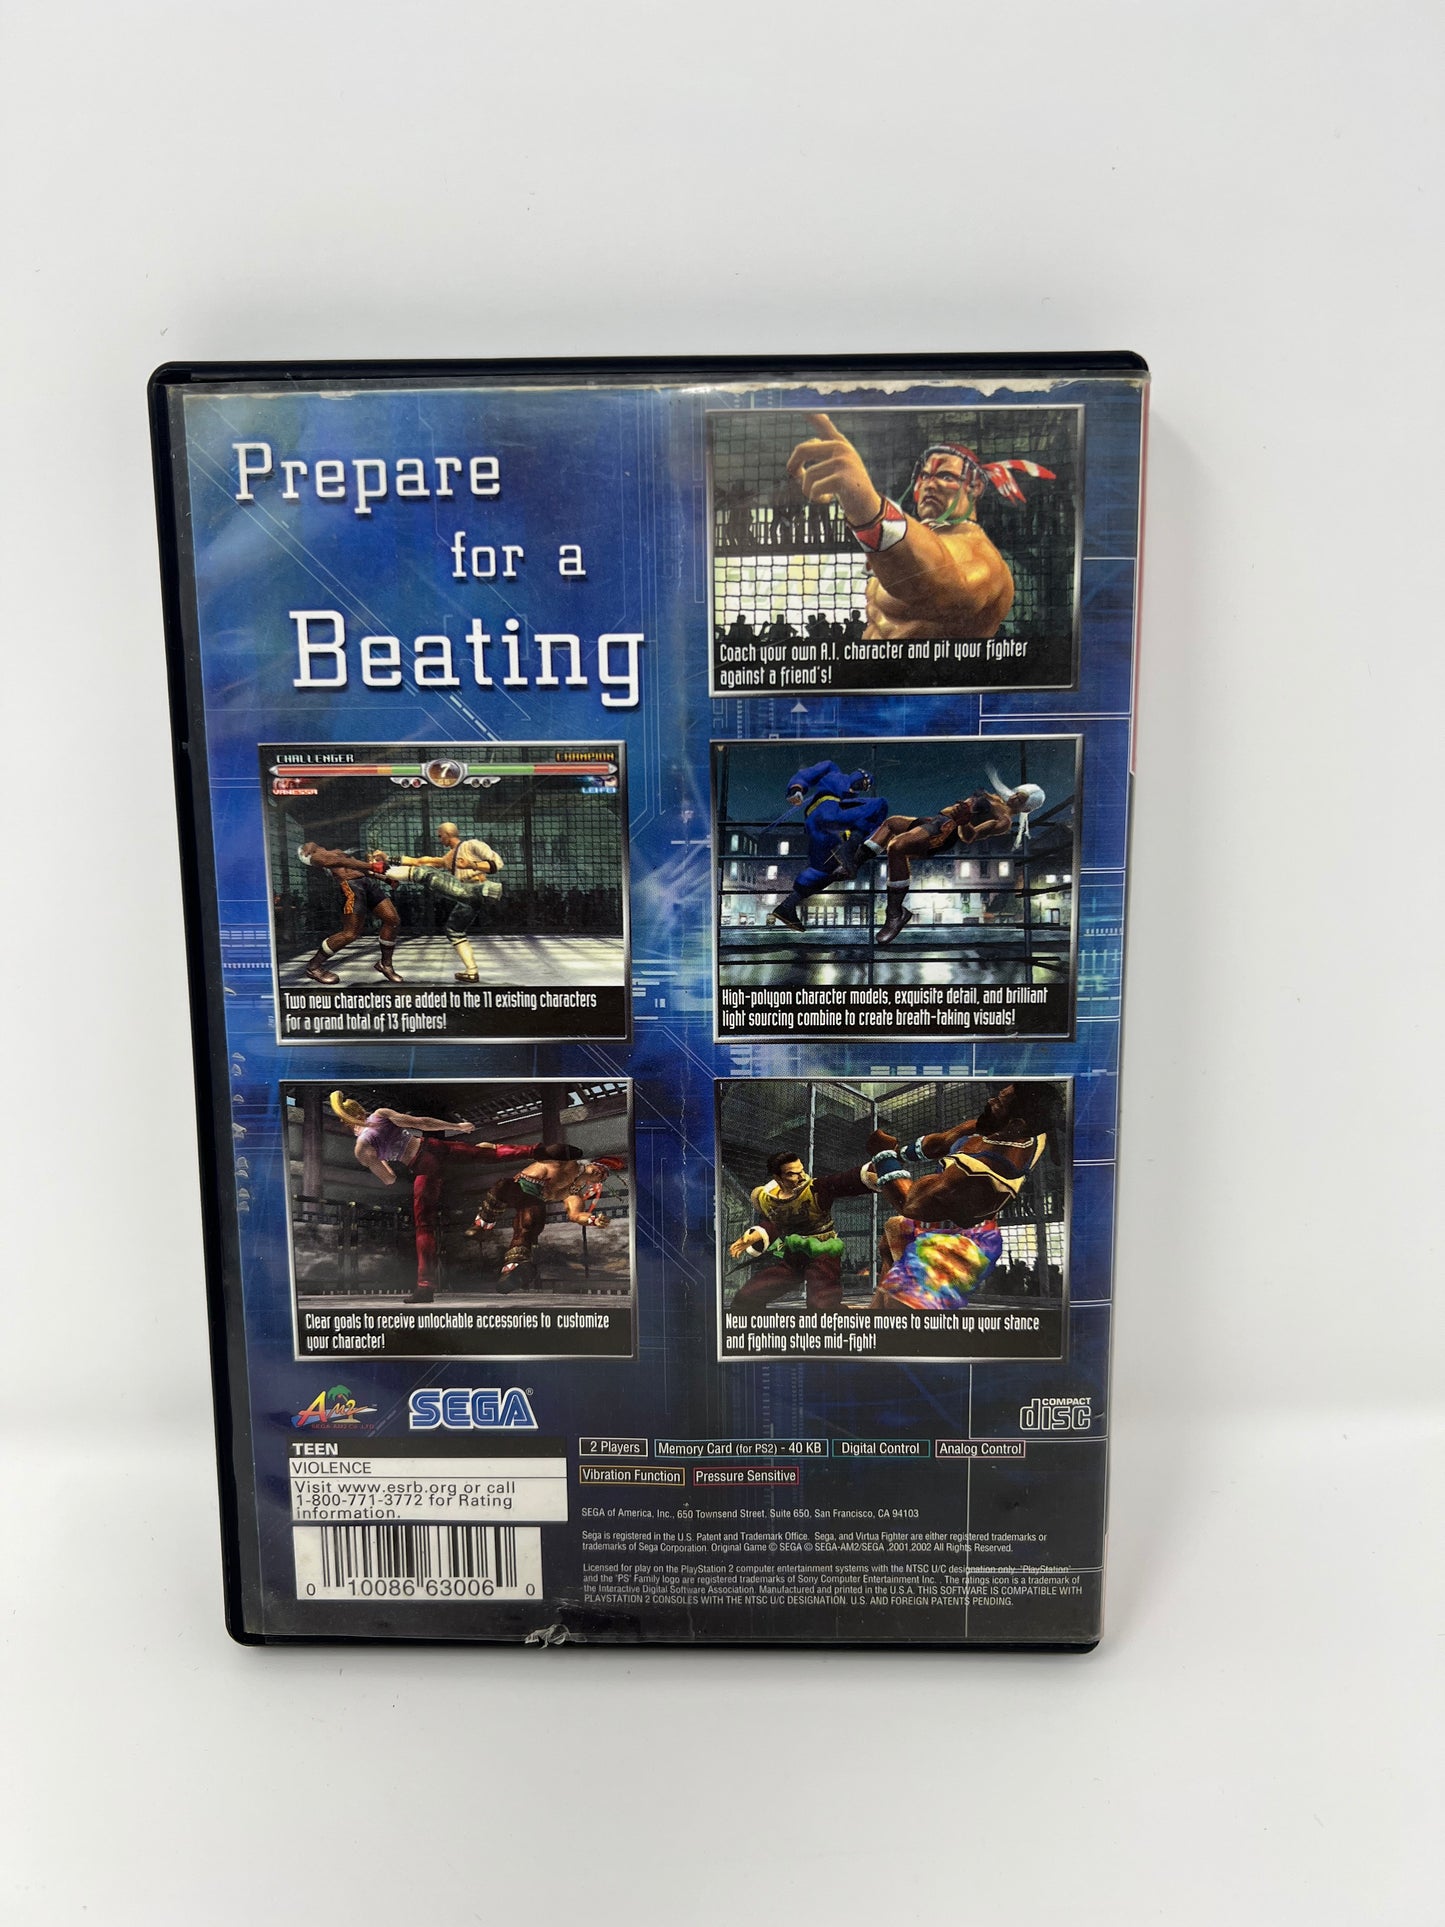 Virtua Fighter 4 (Greatest Hits) - PS2 Game - Used